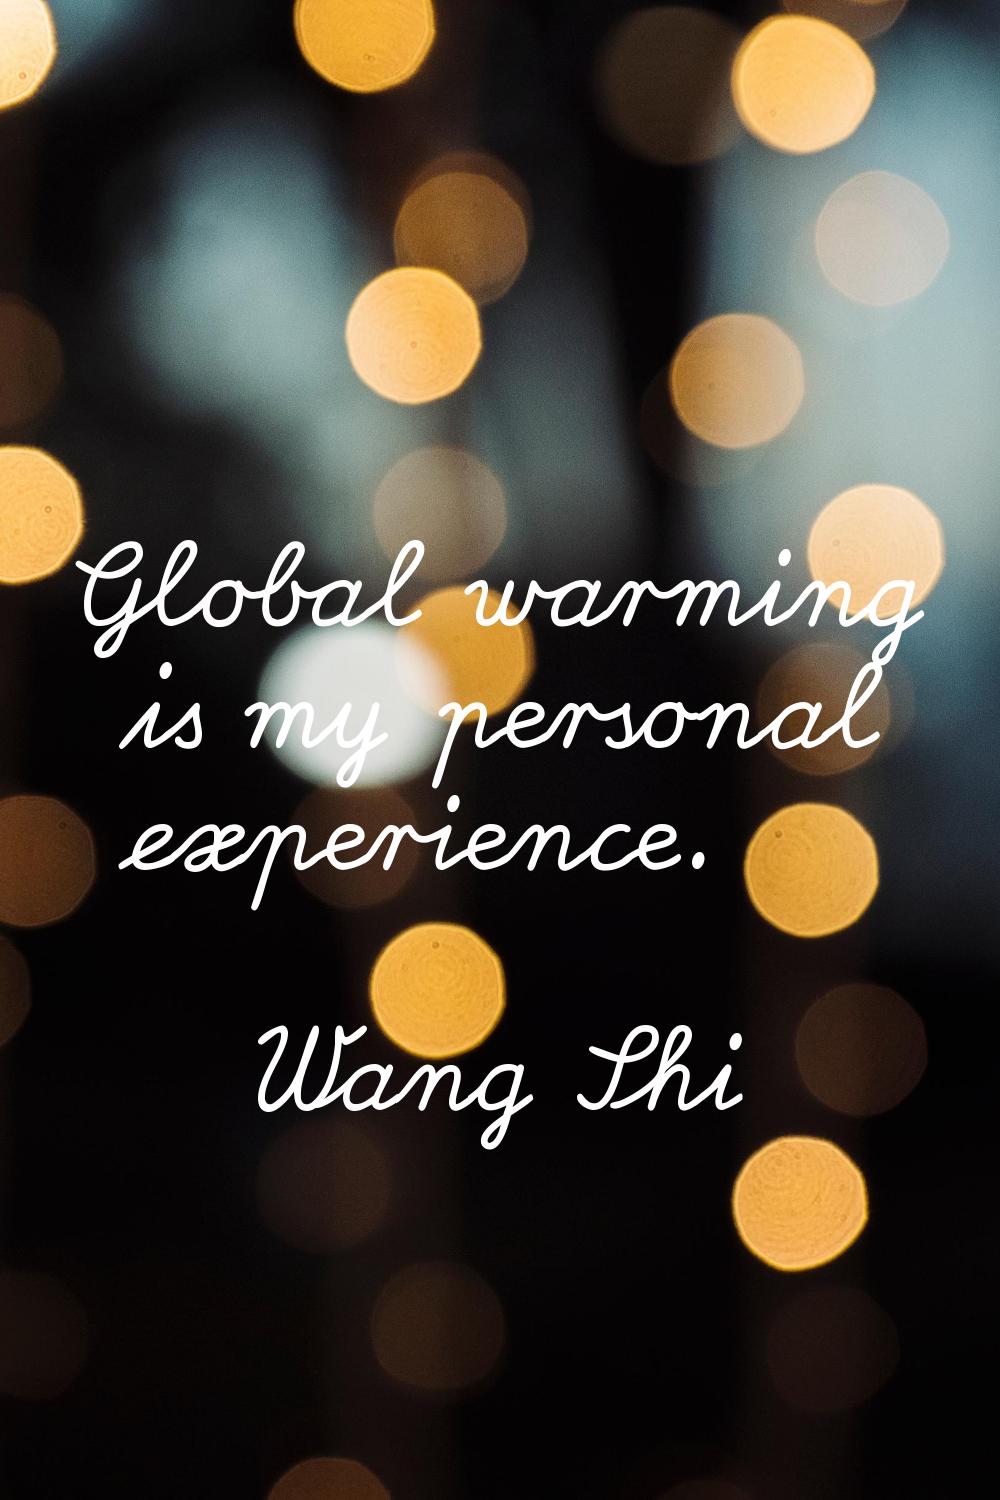 Global warming is my personal experience.